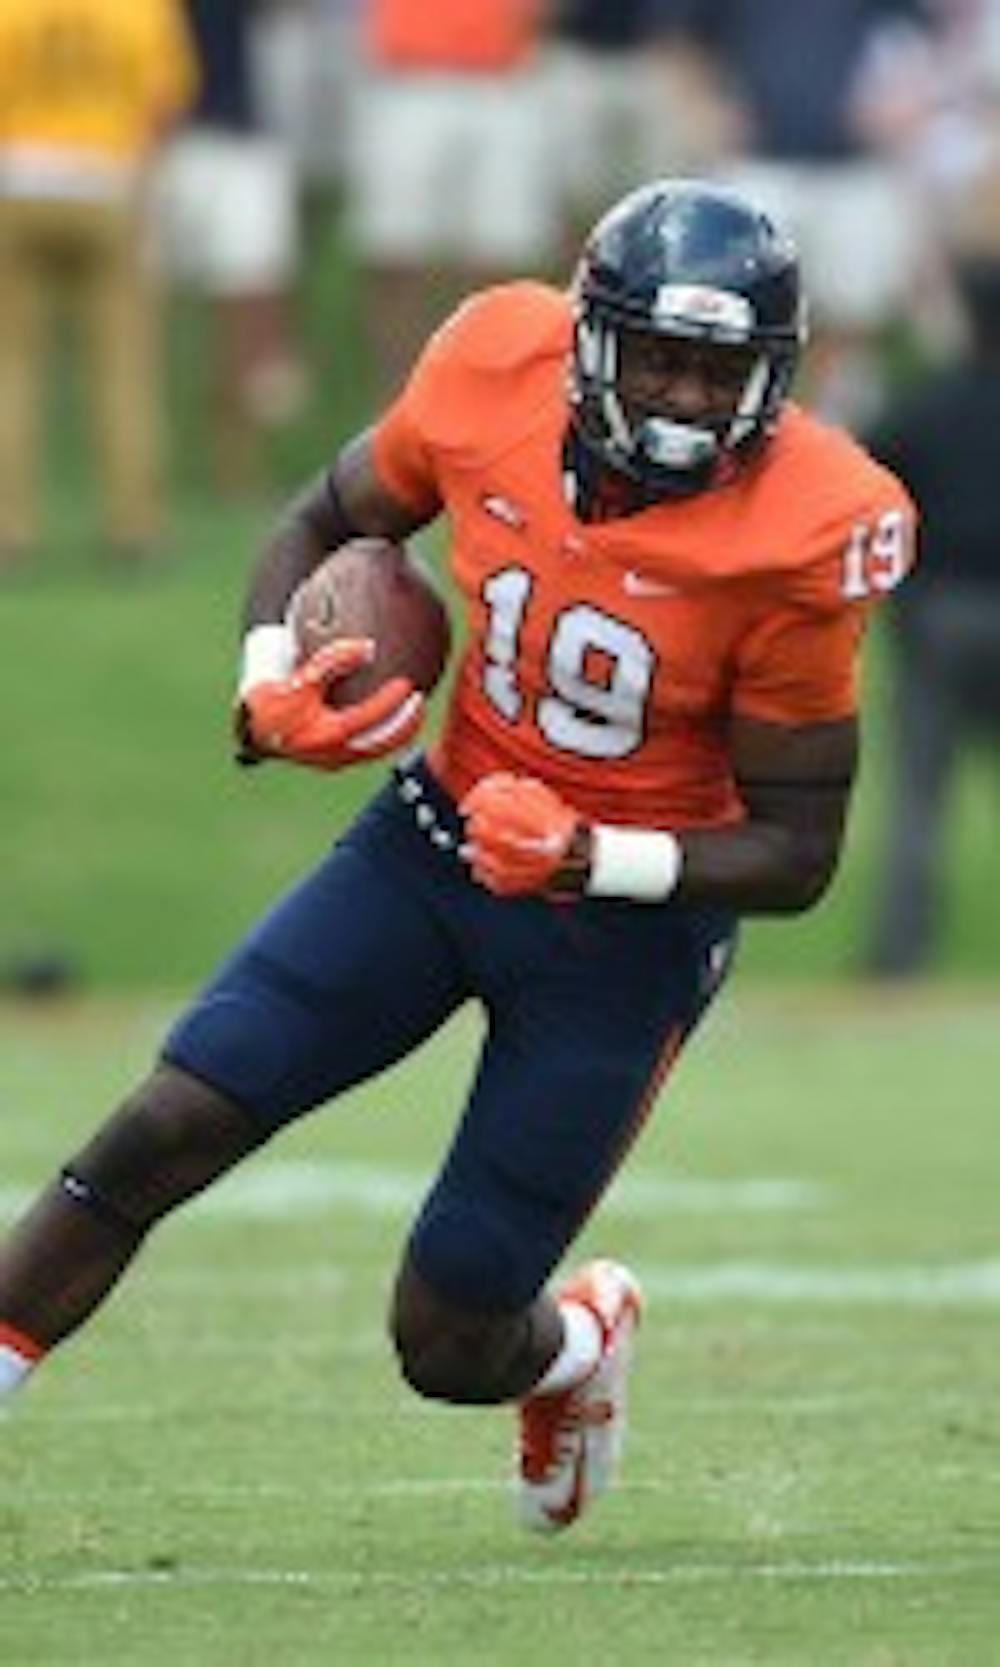 <p>Junior&nbsp;Doni Dowling, who caught just one pass in an injury plagued sophomore season, emerged this fall as Virginia's top X receiver.</p>